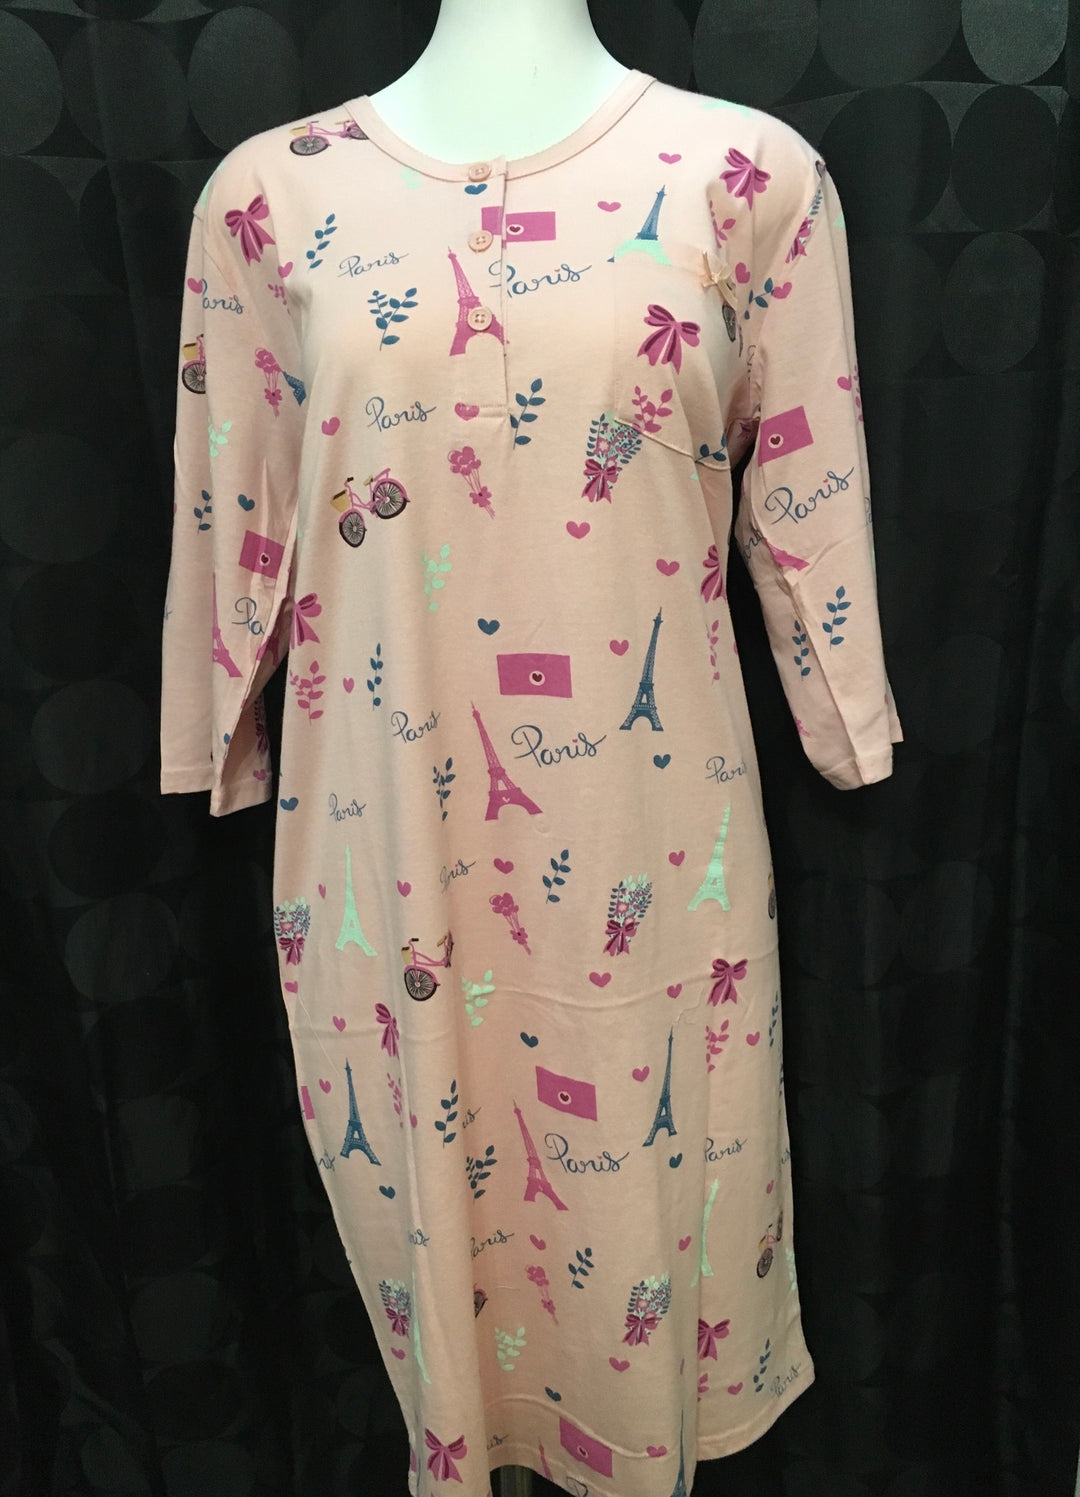 Paris Nightgown - Size Small